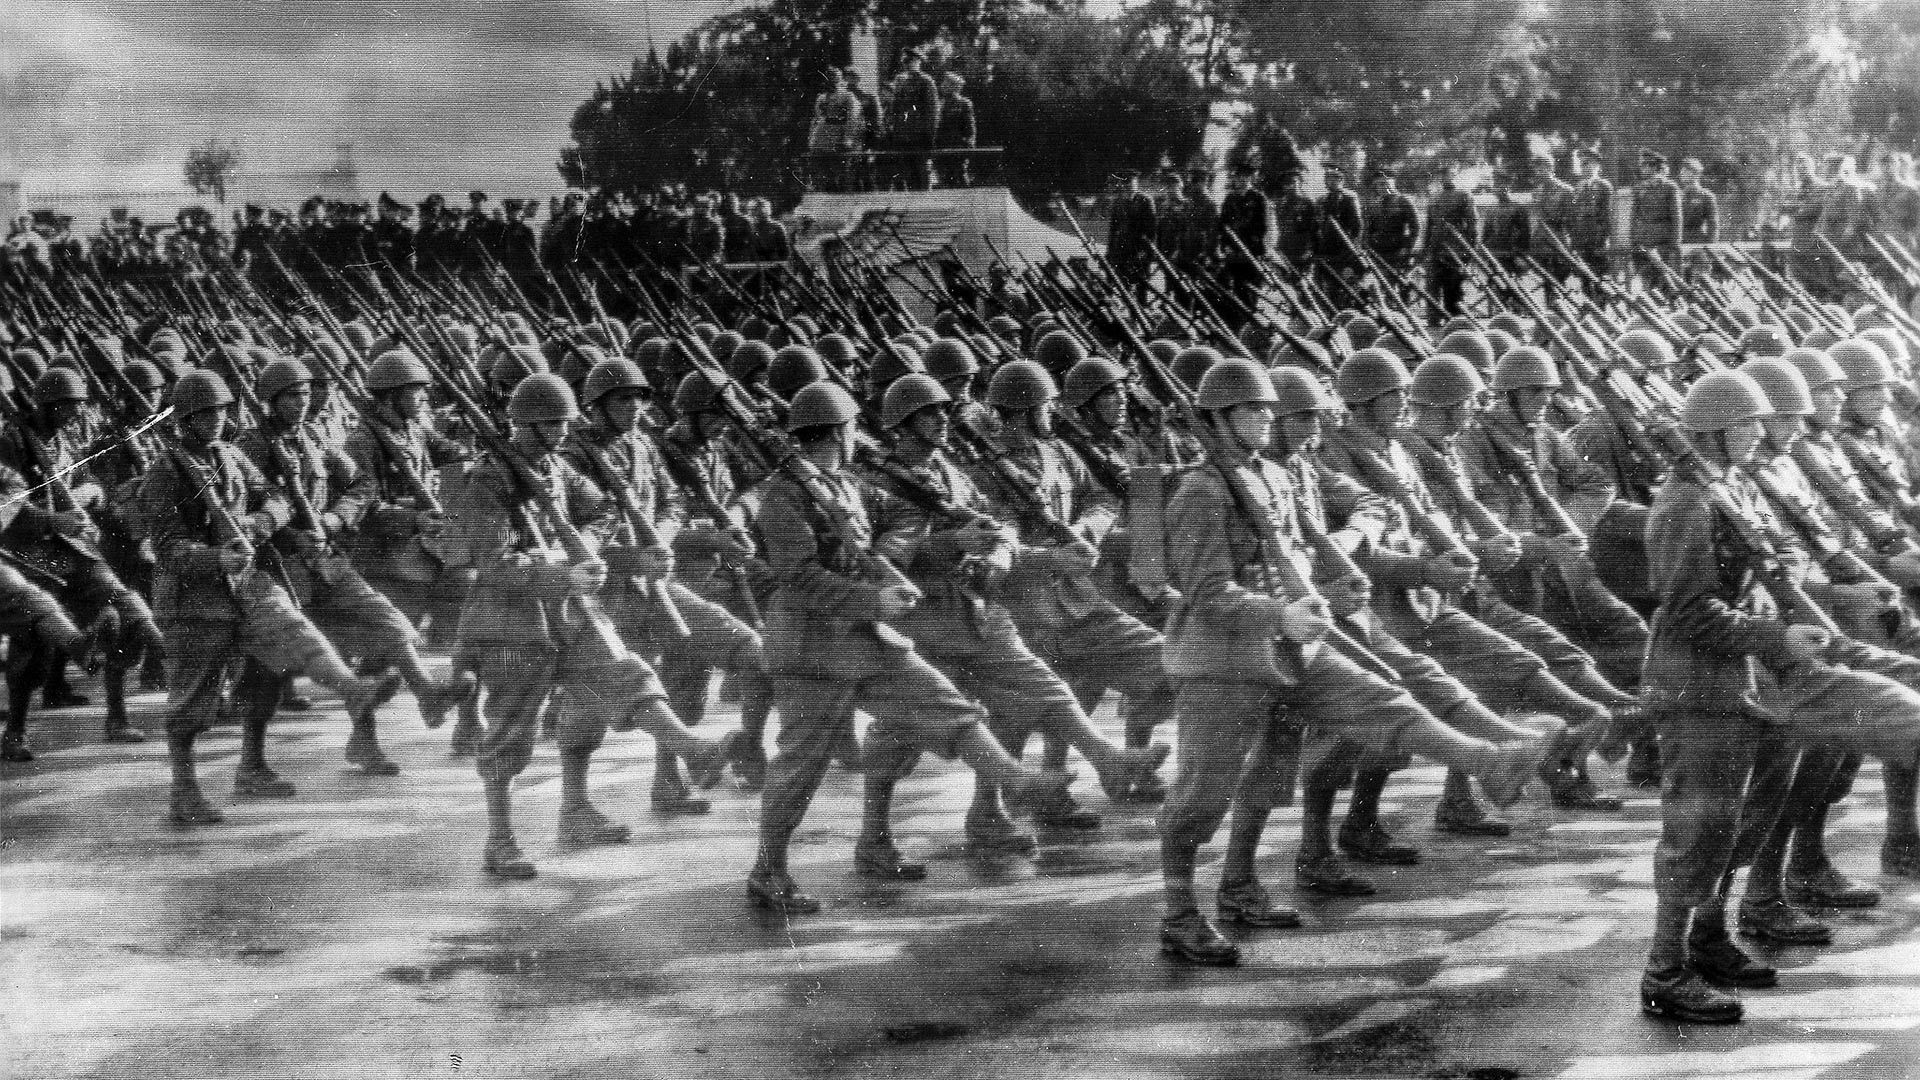 Parade of Italian troops in Rome.